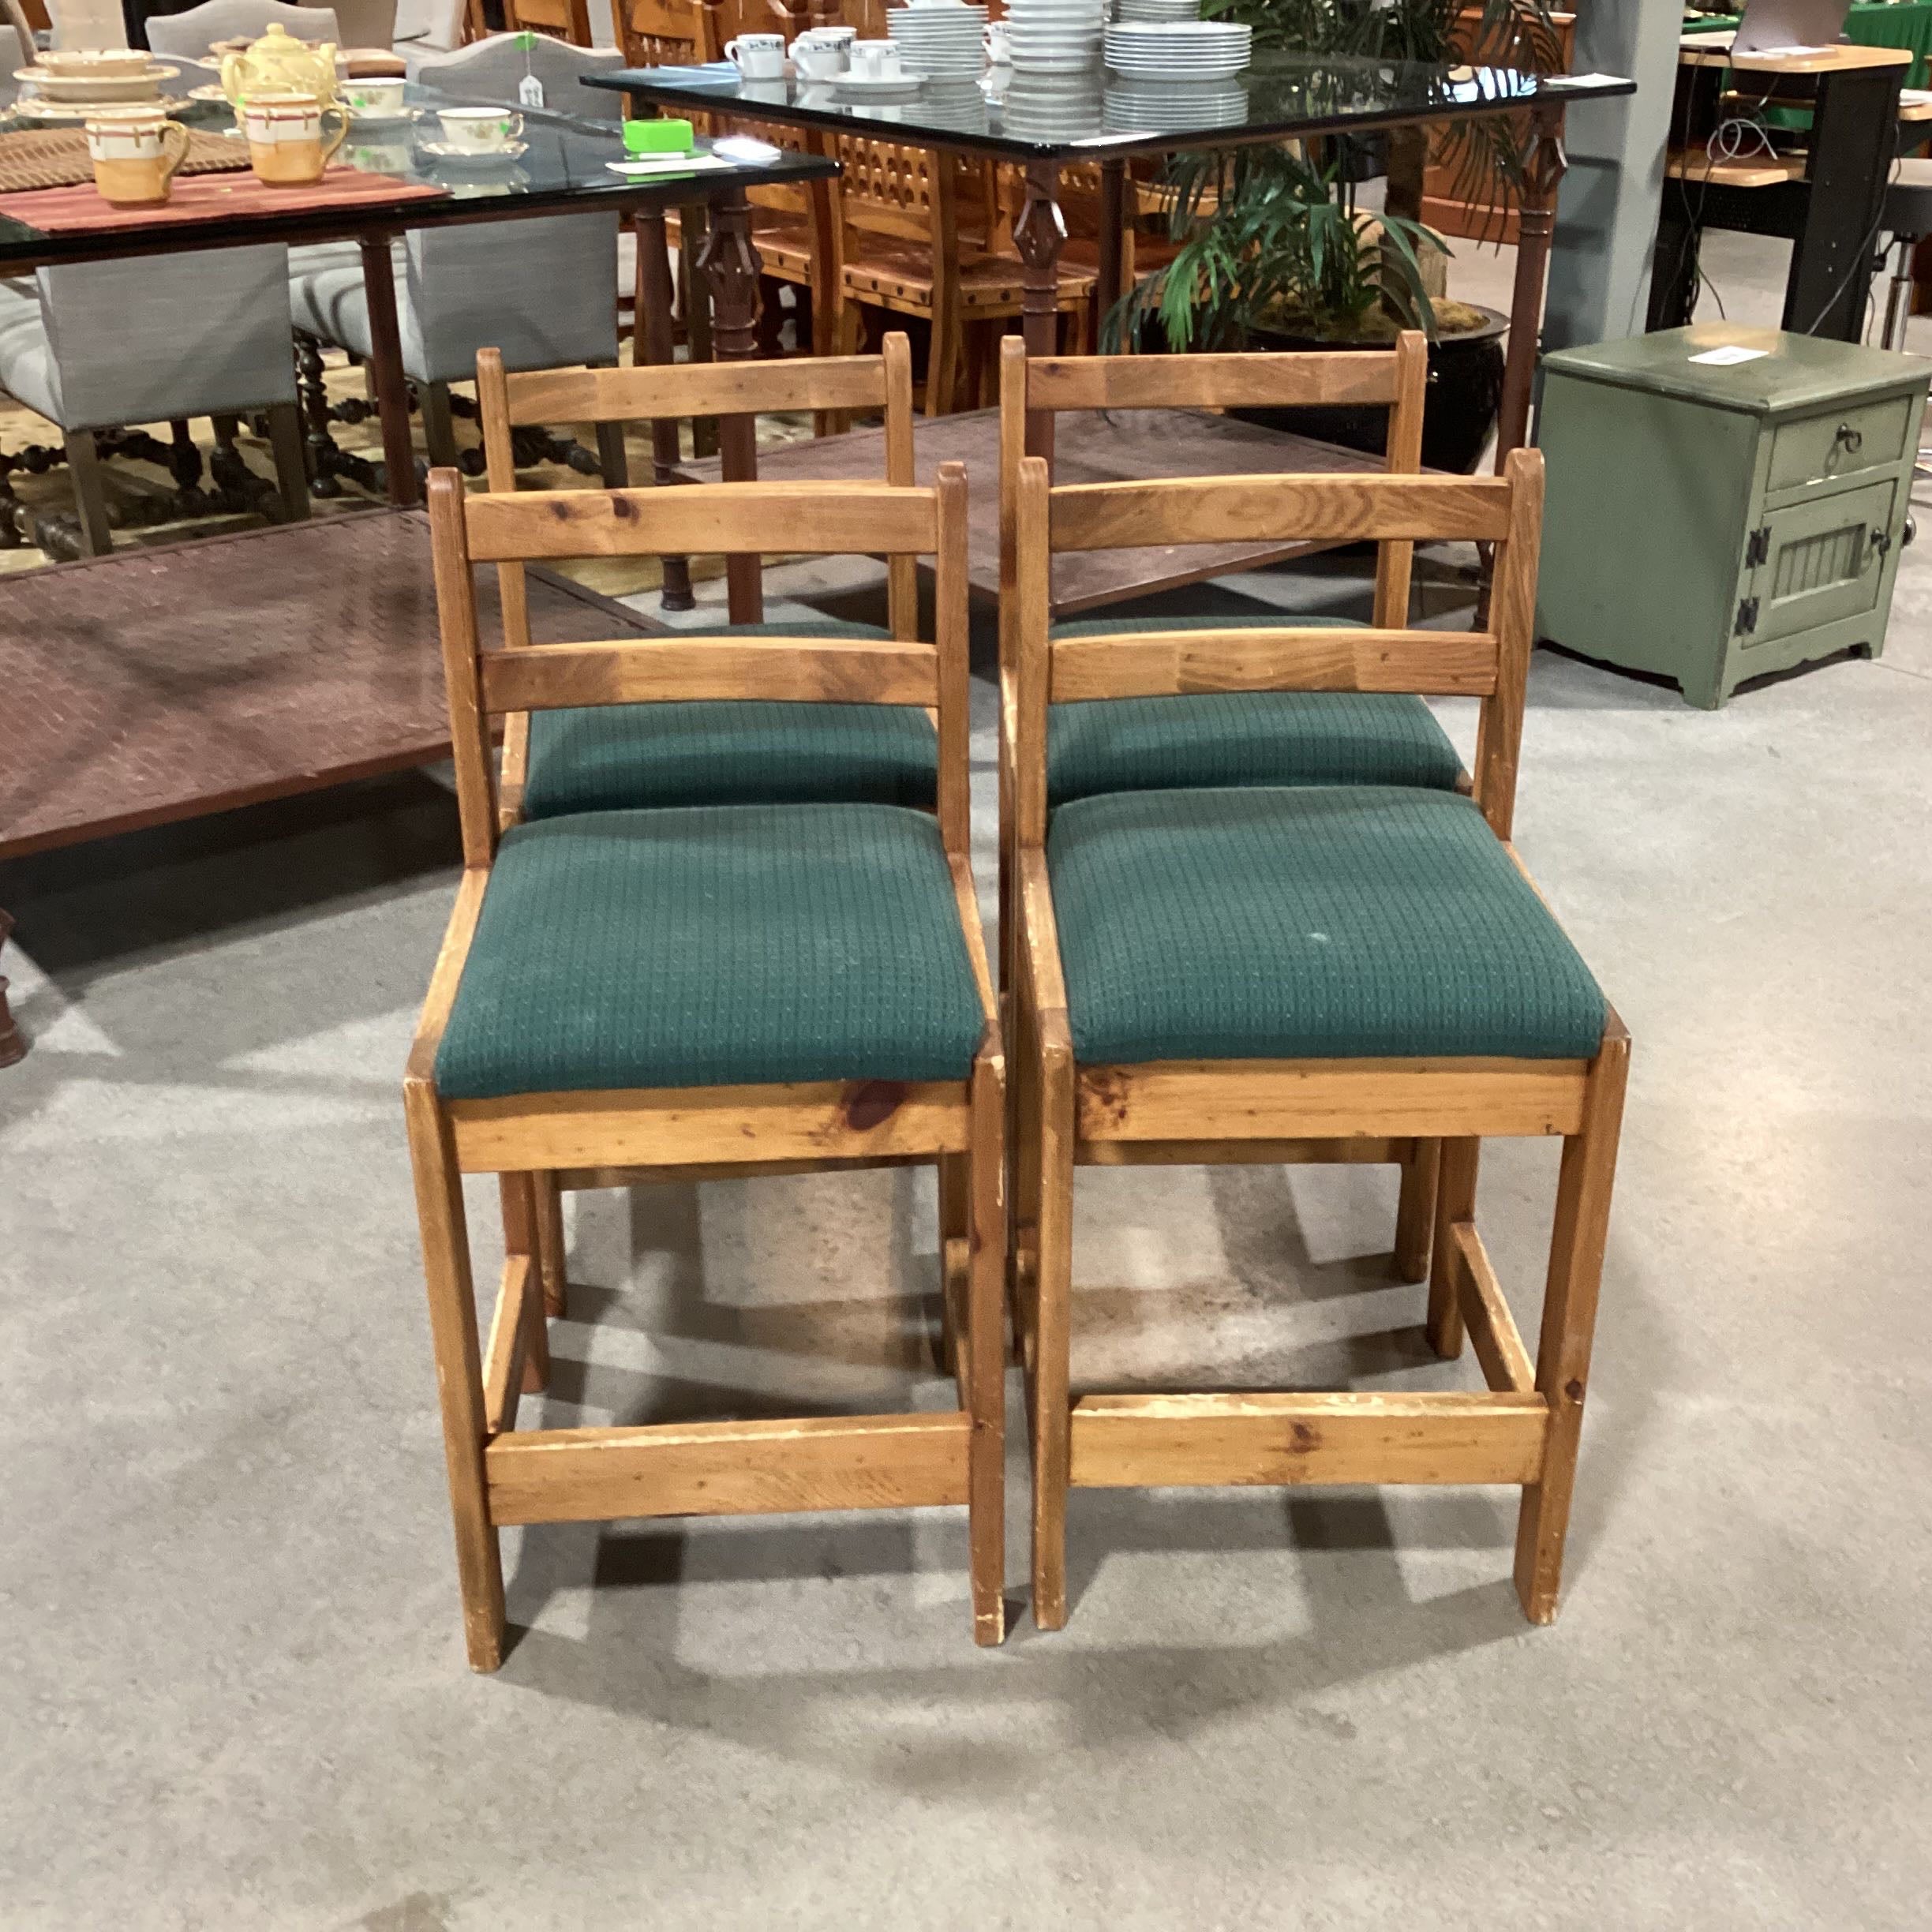 Set of 4 Distressed Pine & Forest Green Seat Barstools